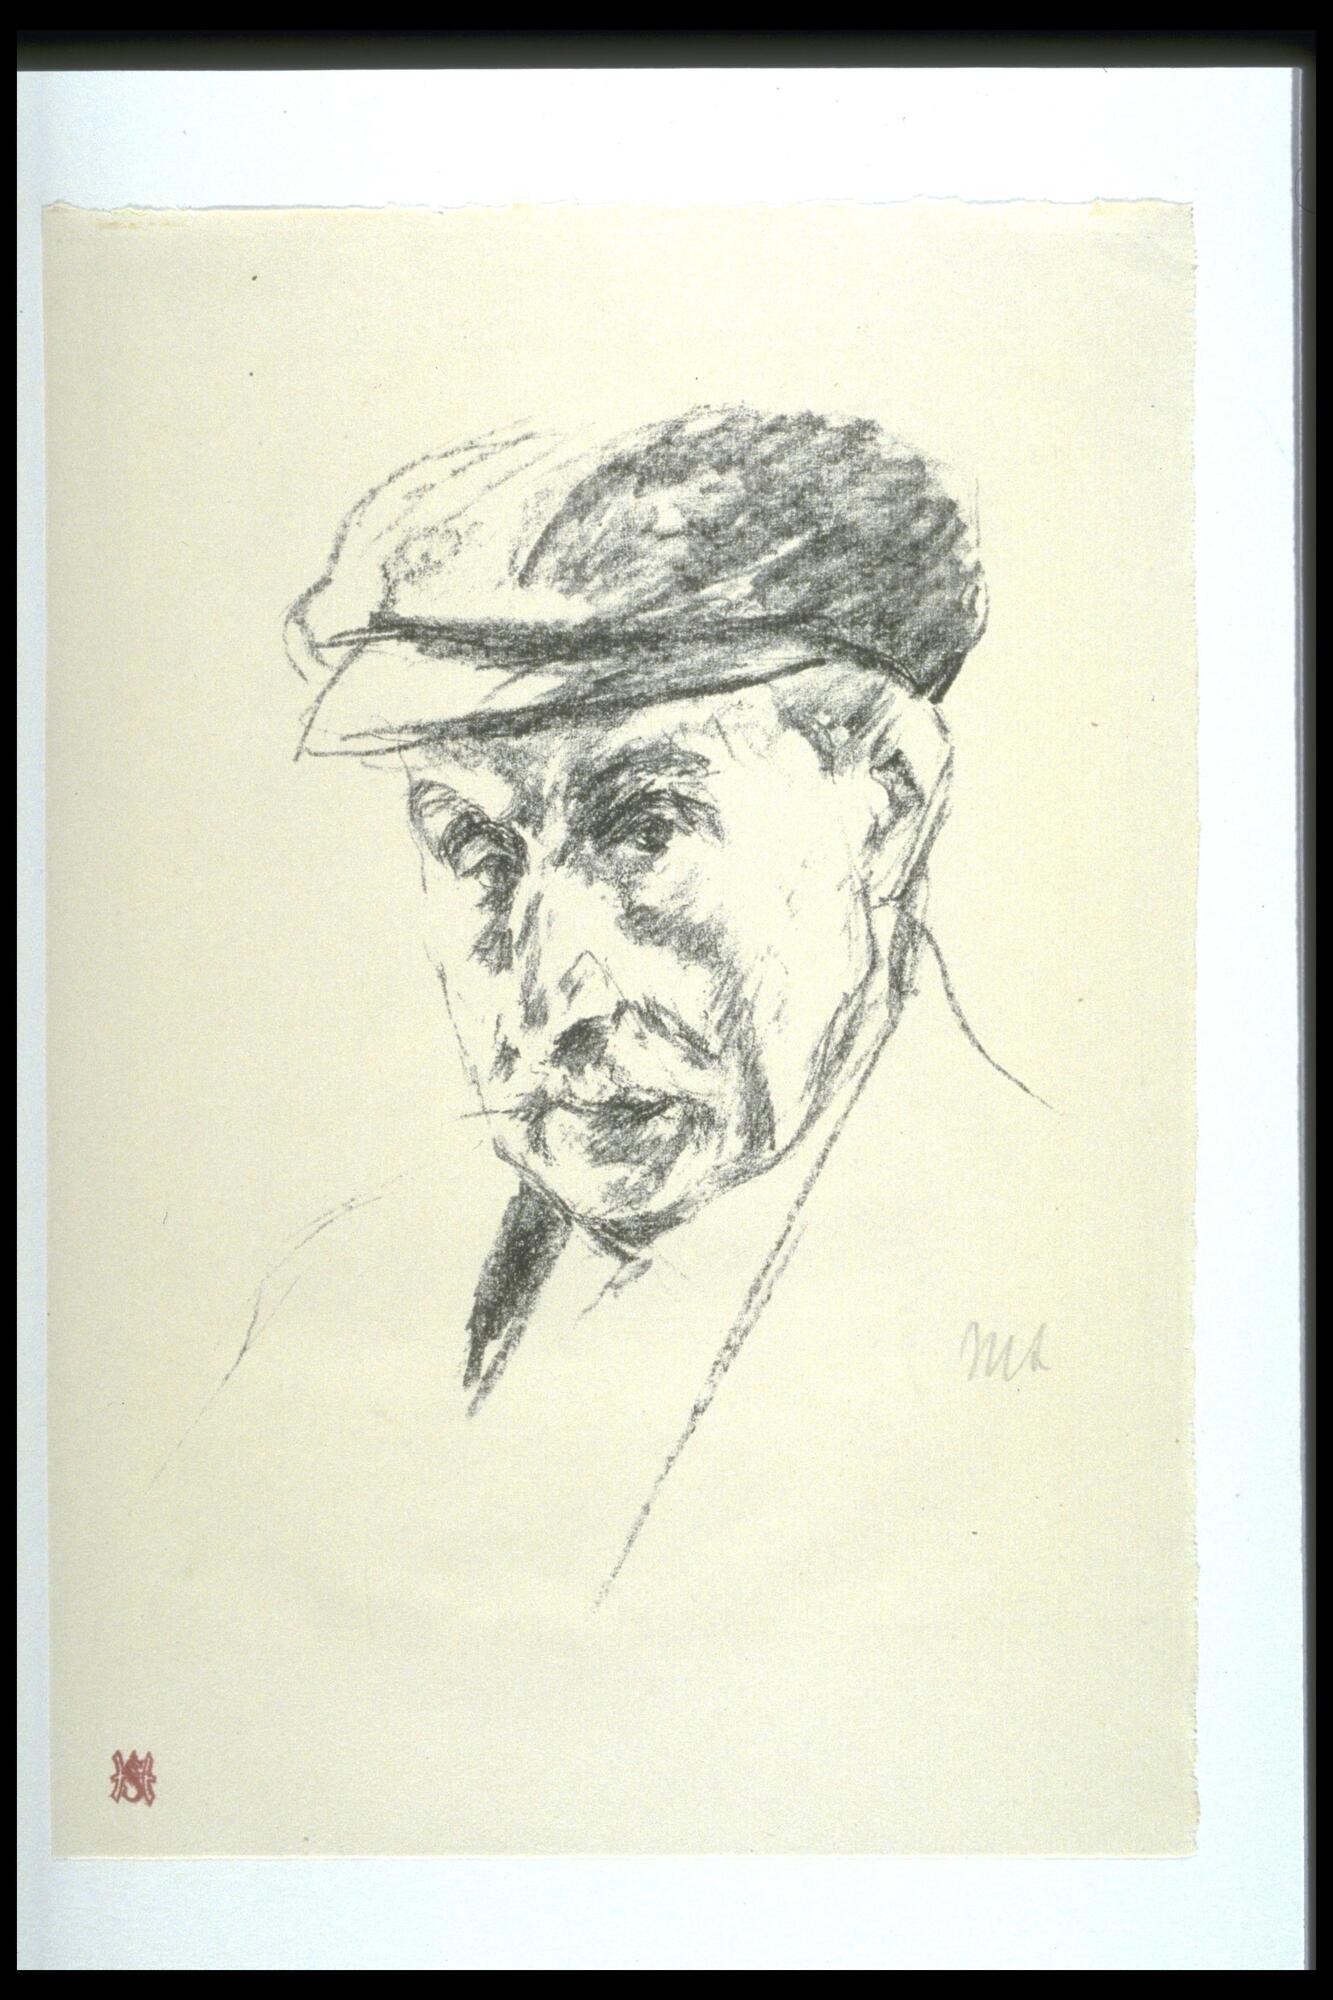 In this self-potrait, Max Liebermann appears to be in his elder years.  He sports a cap and coat, and his gaze seems slightly off to the side.